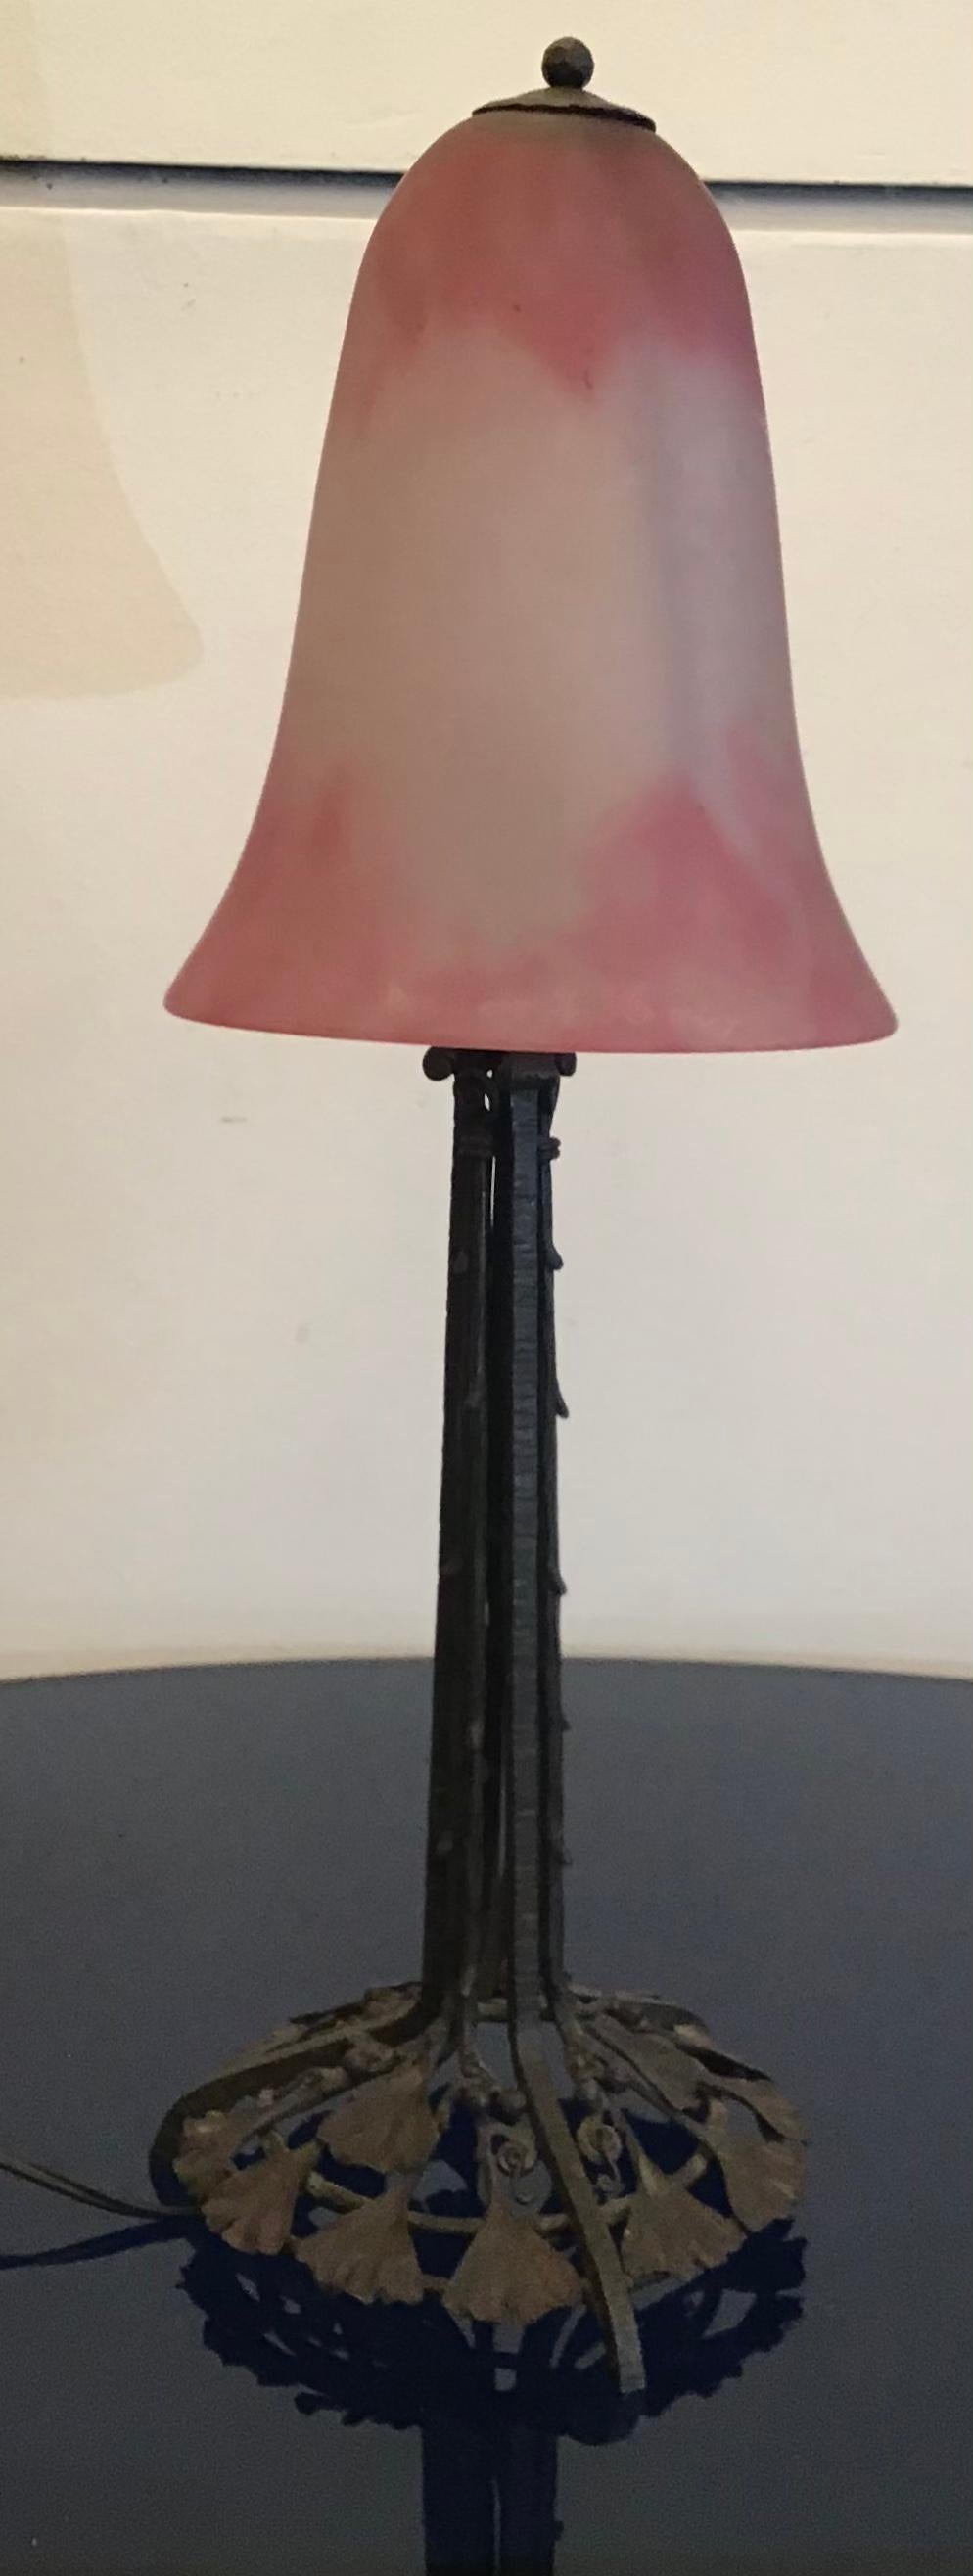 Daum Nancy Table Lamp Blown Glass Wrought Iron 1910 France For Sale 1